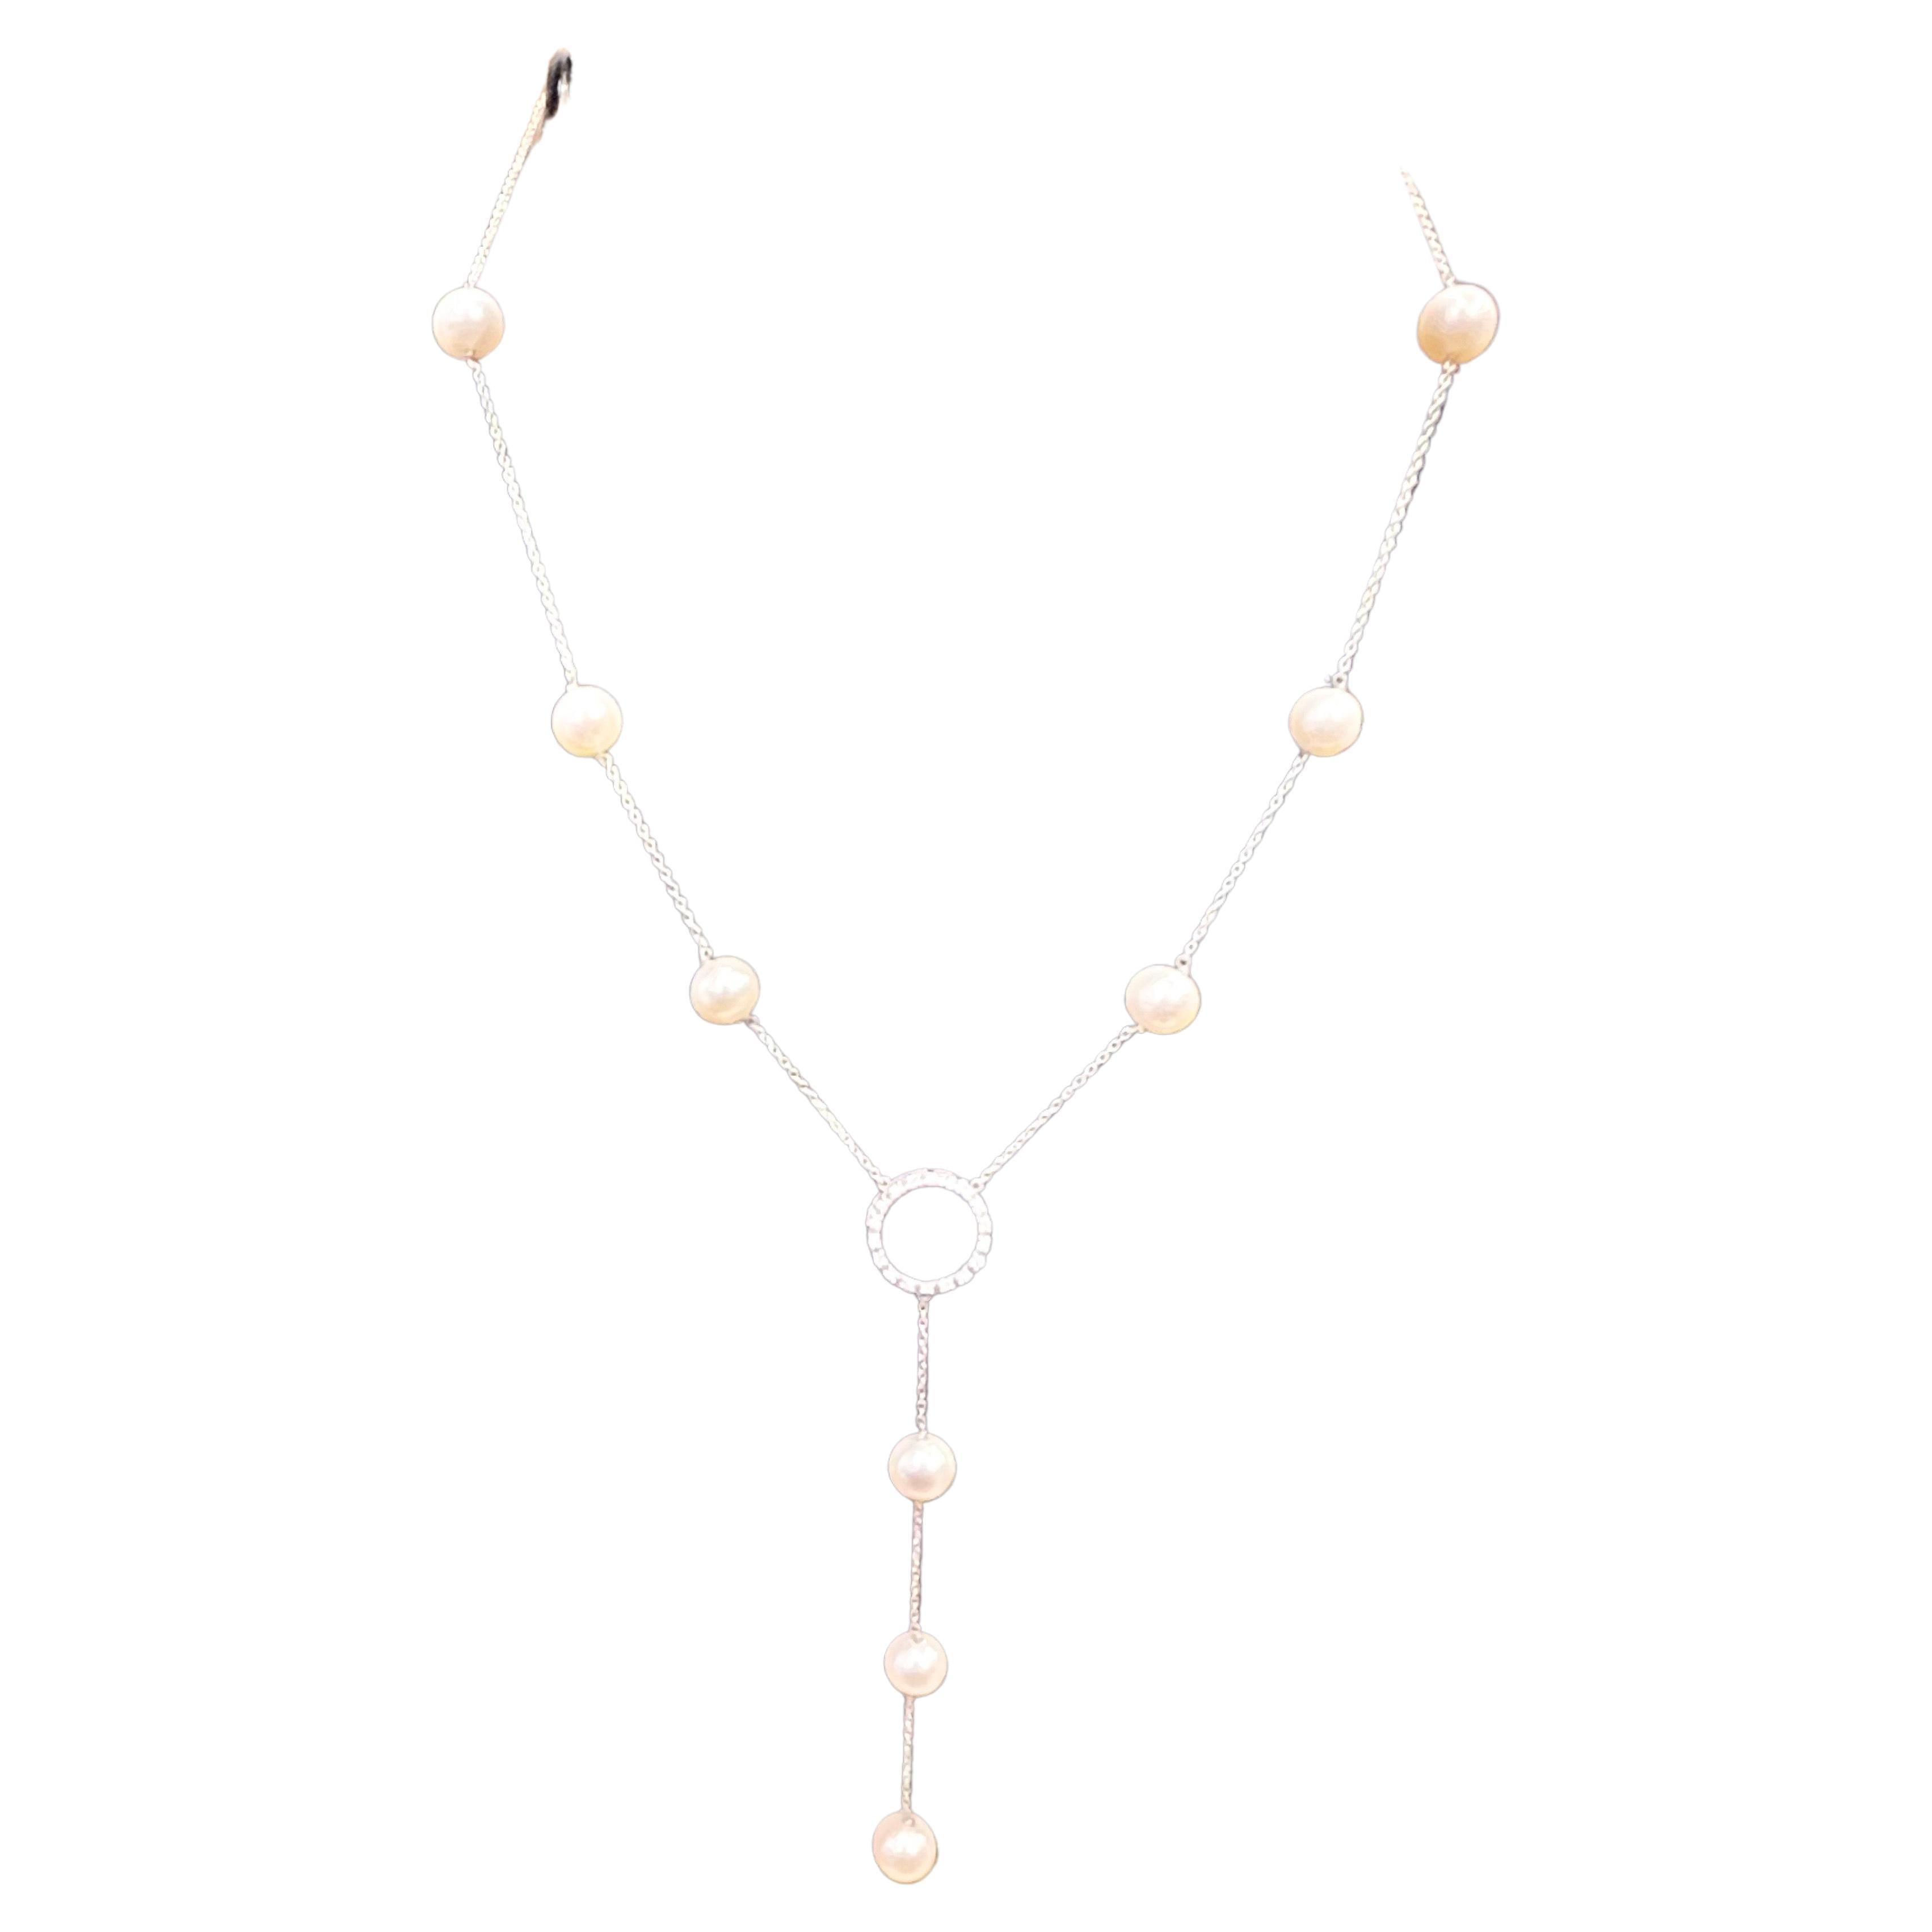 Fresh Water pearl  in Sterling Silver And Cubic Zirconia Necklace, 22 Inch
Cubic Zirconia or CZ is the cubic Crystalline form Of Zirconium dioxide. Its Hard and Usually  colorless.
It has a circle of CZ in the center and has  9 fresh water